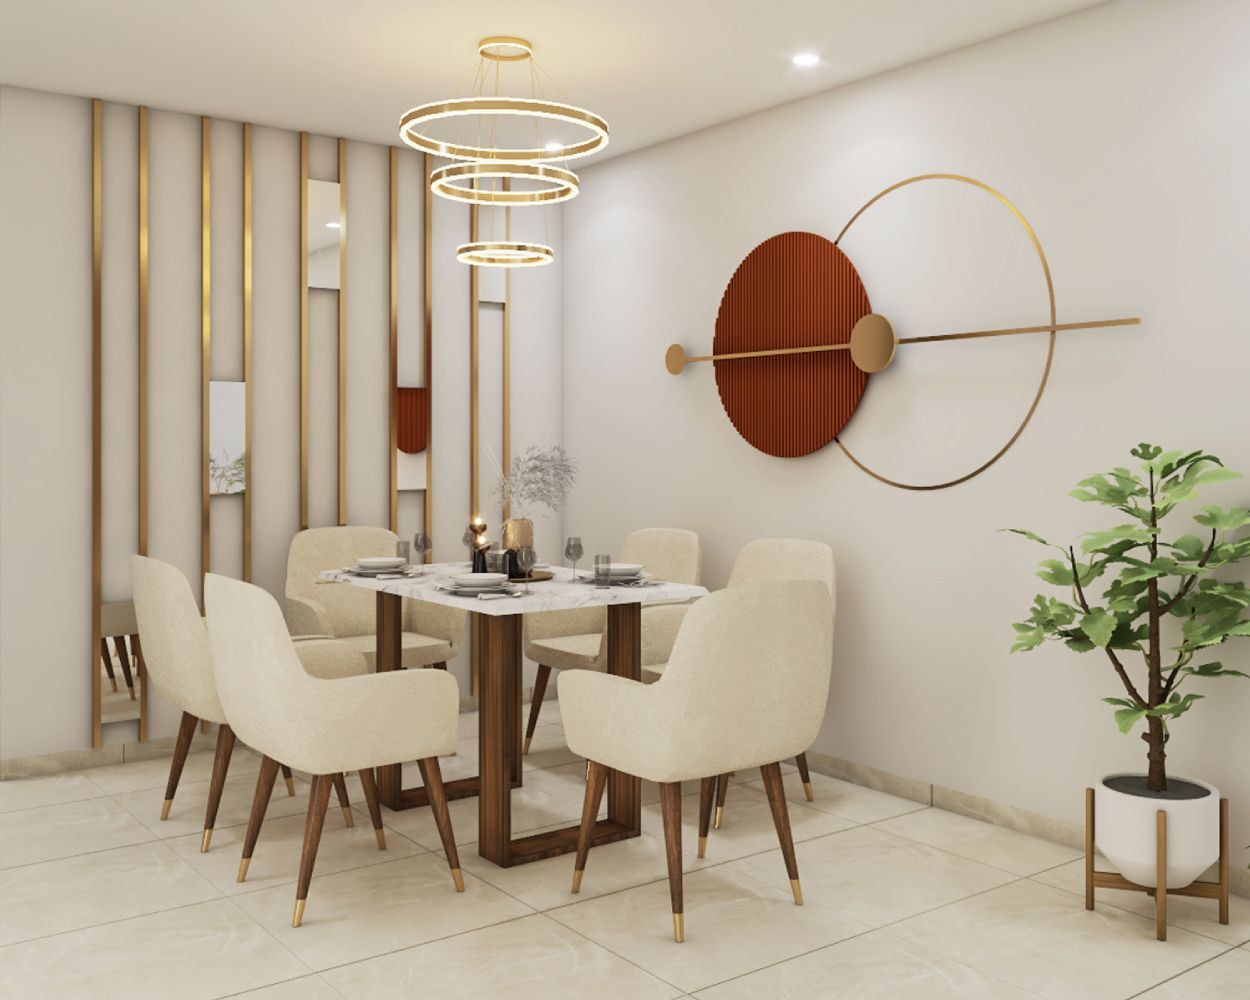 Contemporary 6-Seater White And Beige Dining Room Design With Gold Wall Panelling